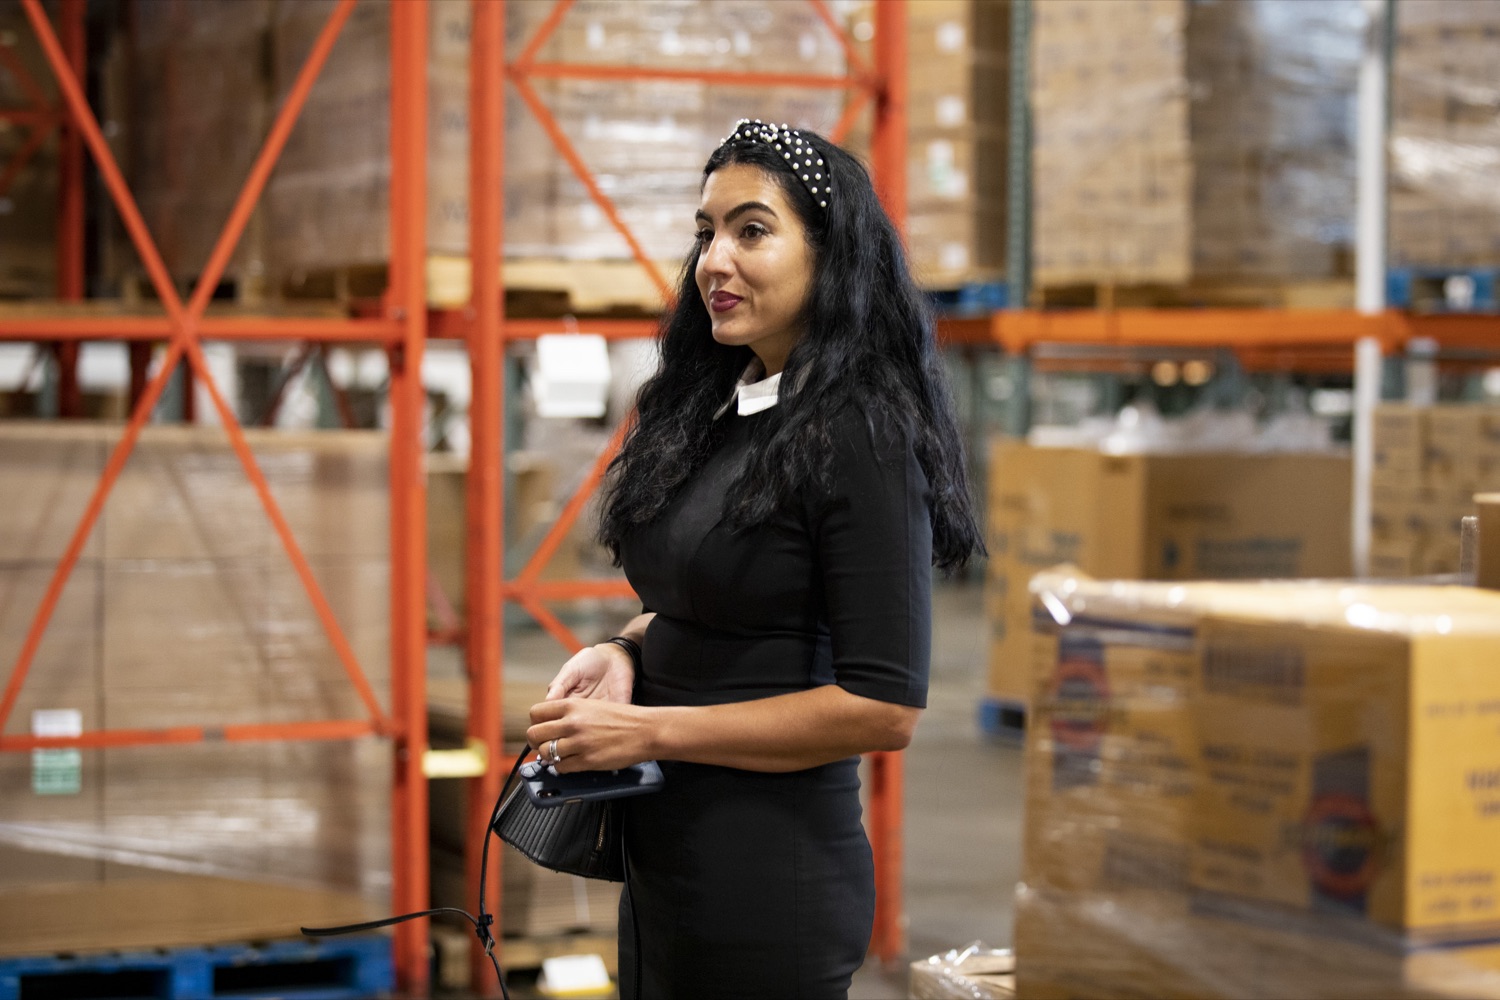 Second Lady of Pennsylvania Gisele Fetterman tours the Westmoreland Food Bank, in Delmont, PA on September 23, 2021.<br><a href="https://filesource.amperwave.net/commonwealthofpa/photo/19091_ag_doordash_cz_21.jpg" target="_blank">⇣ Download Photo</a>